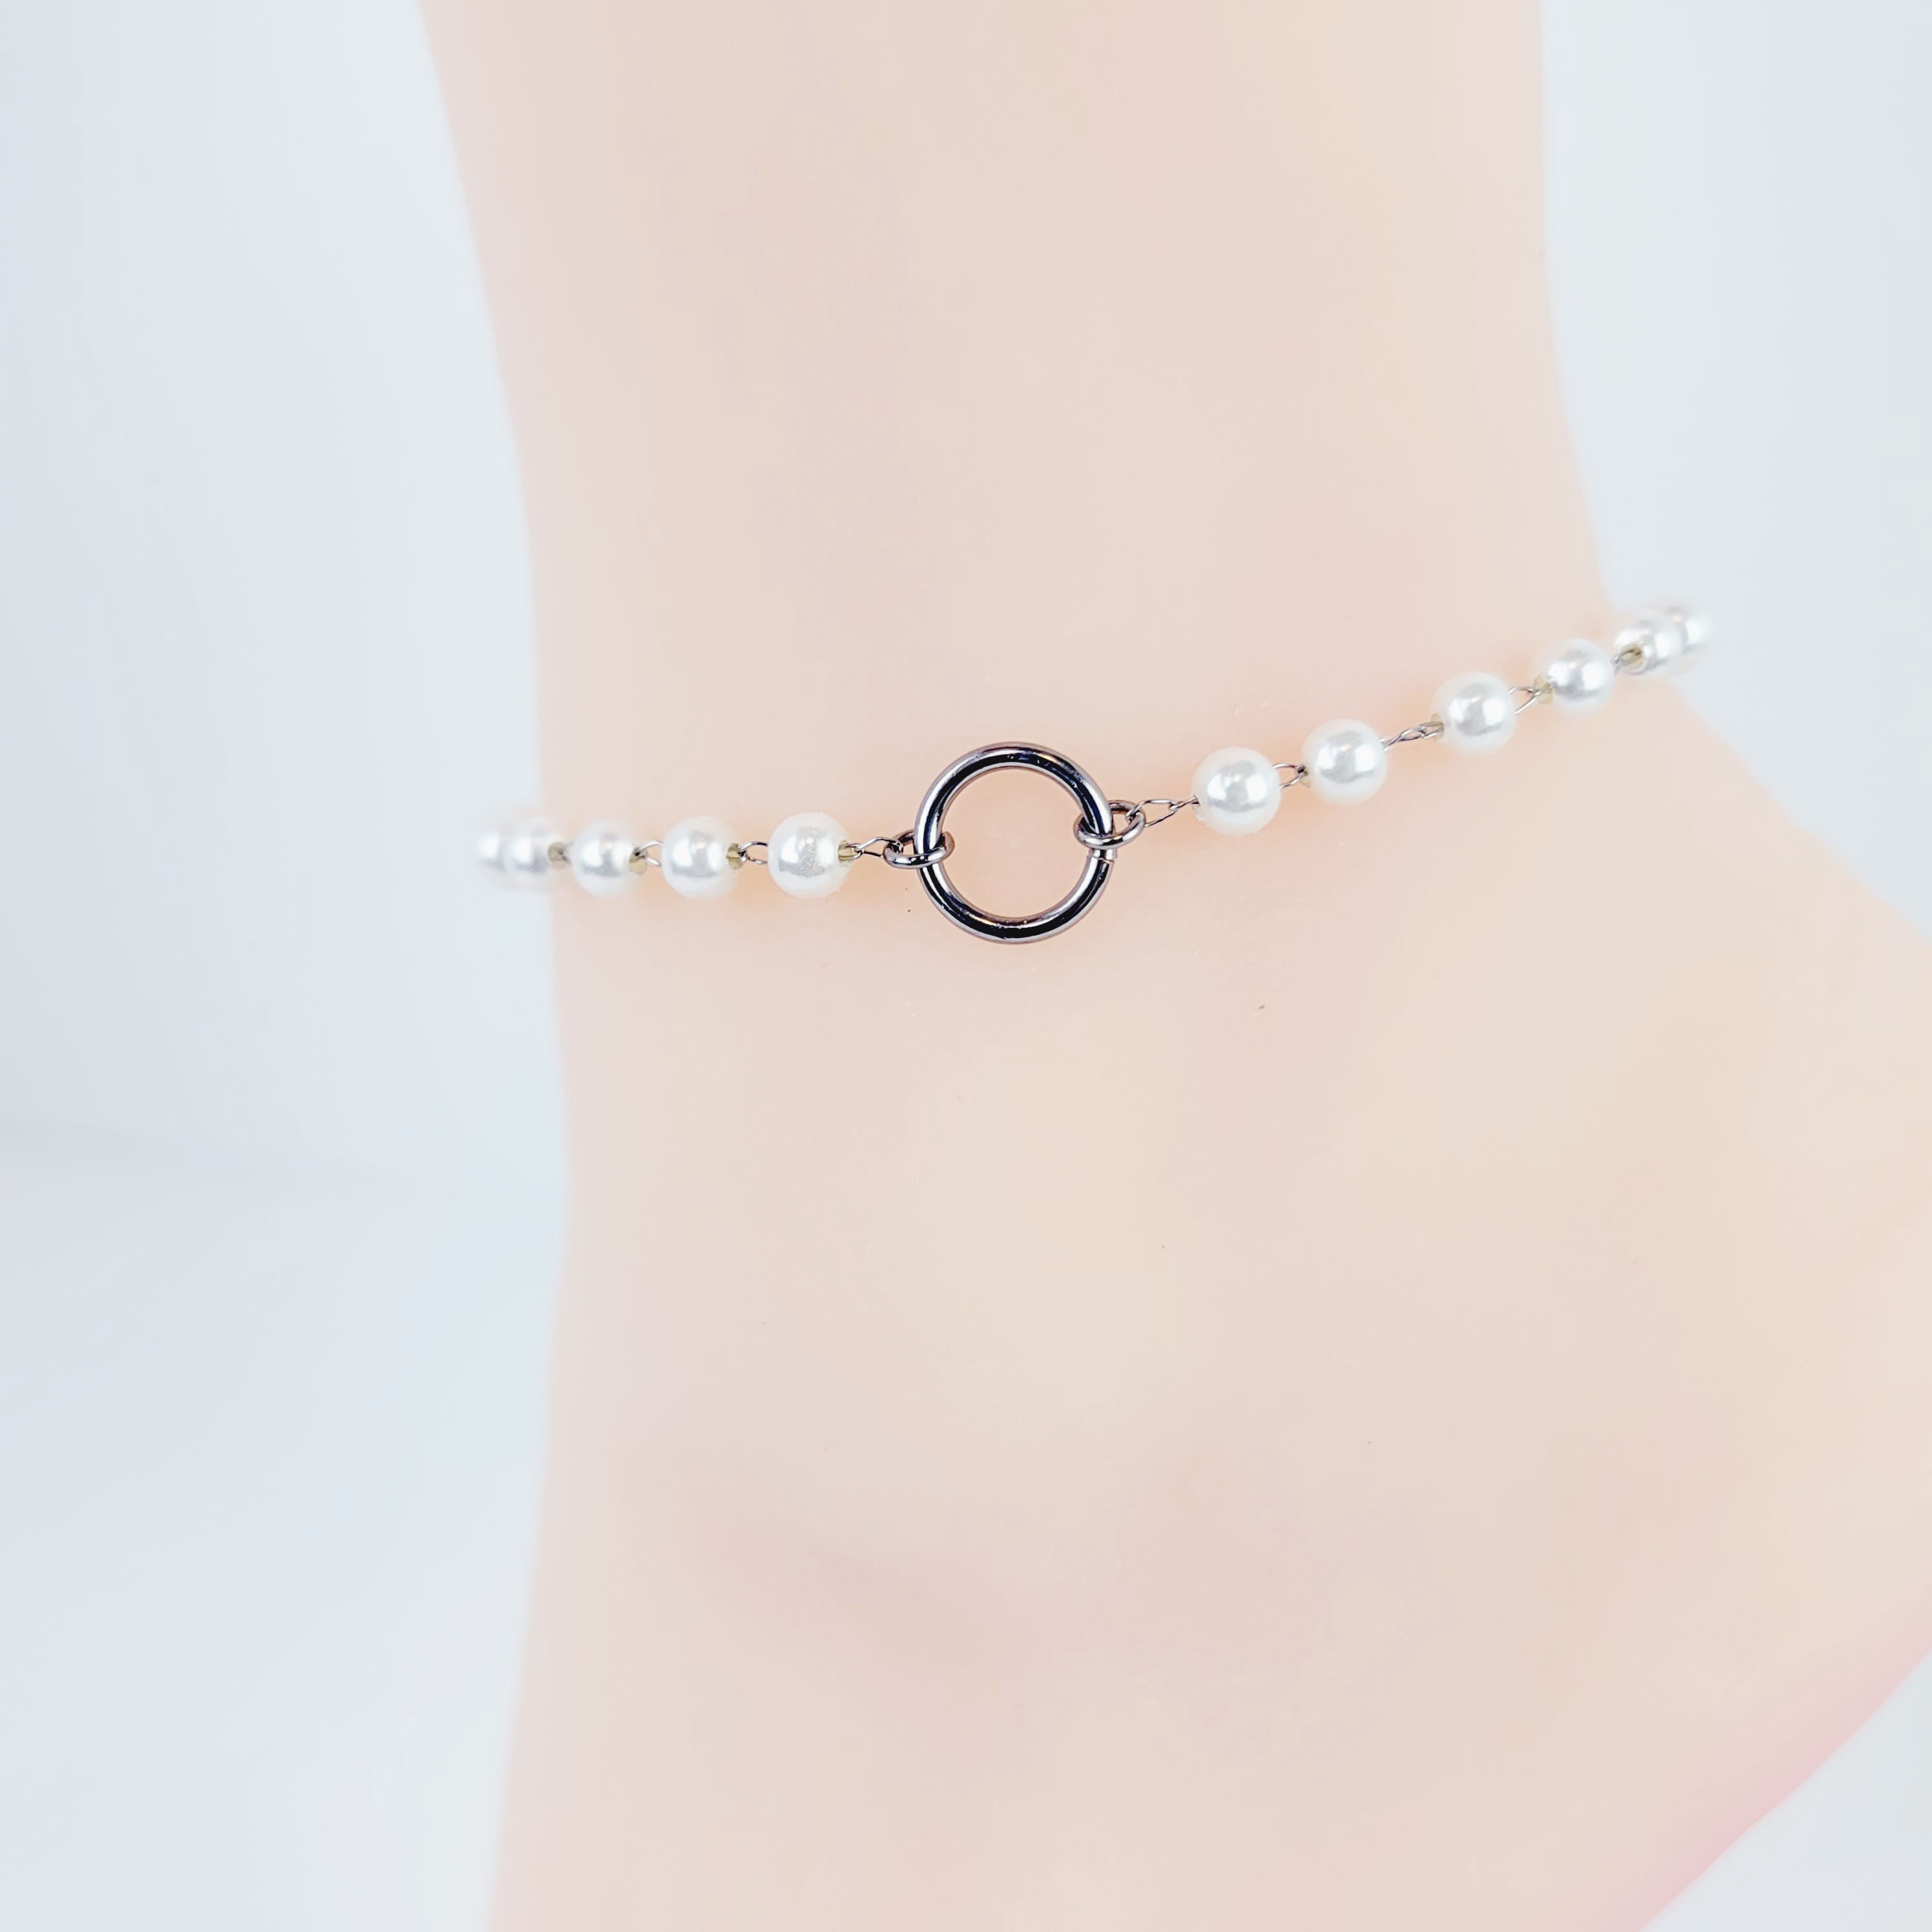 Stainless Steel Circle of O Anklet for Submissive with Pearls. Discreet Day Collar Ankle Bracelet. 24/7 wear, BDSM photo